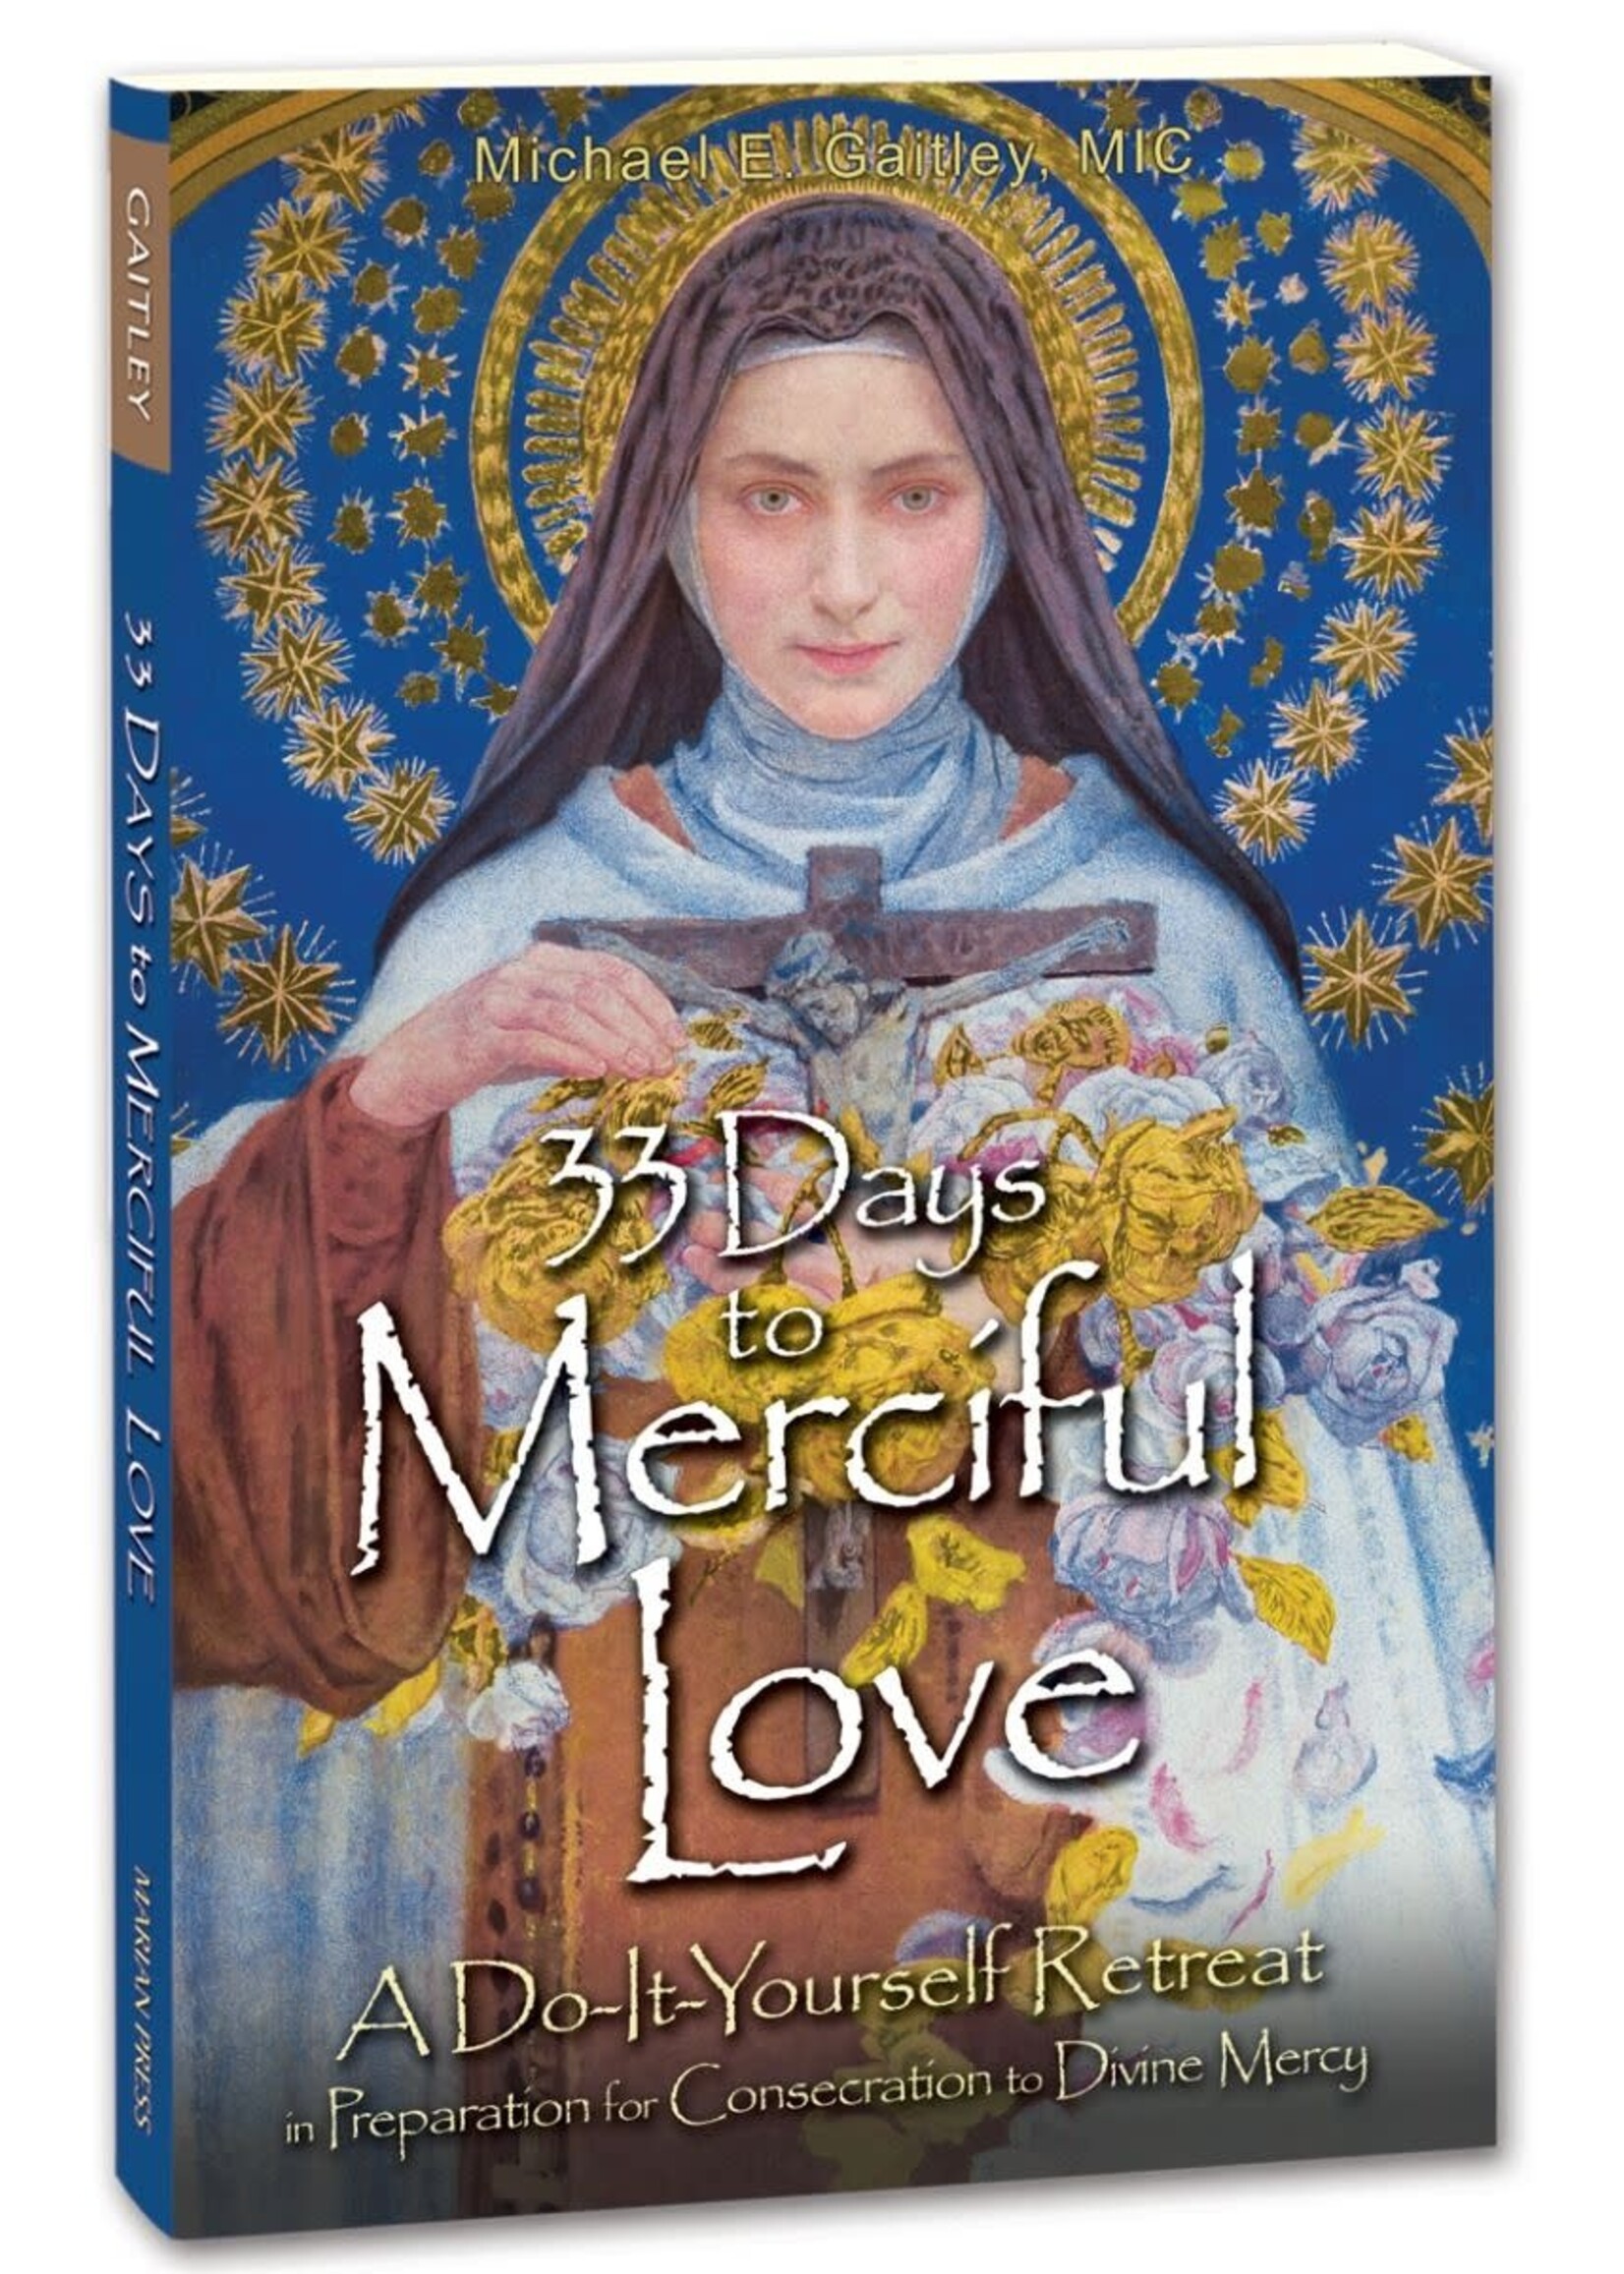 33 Days to Merciful Love: A Do-It-Yourself Retreat in Preparation for Consecration to Divine Mercy